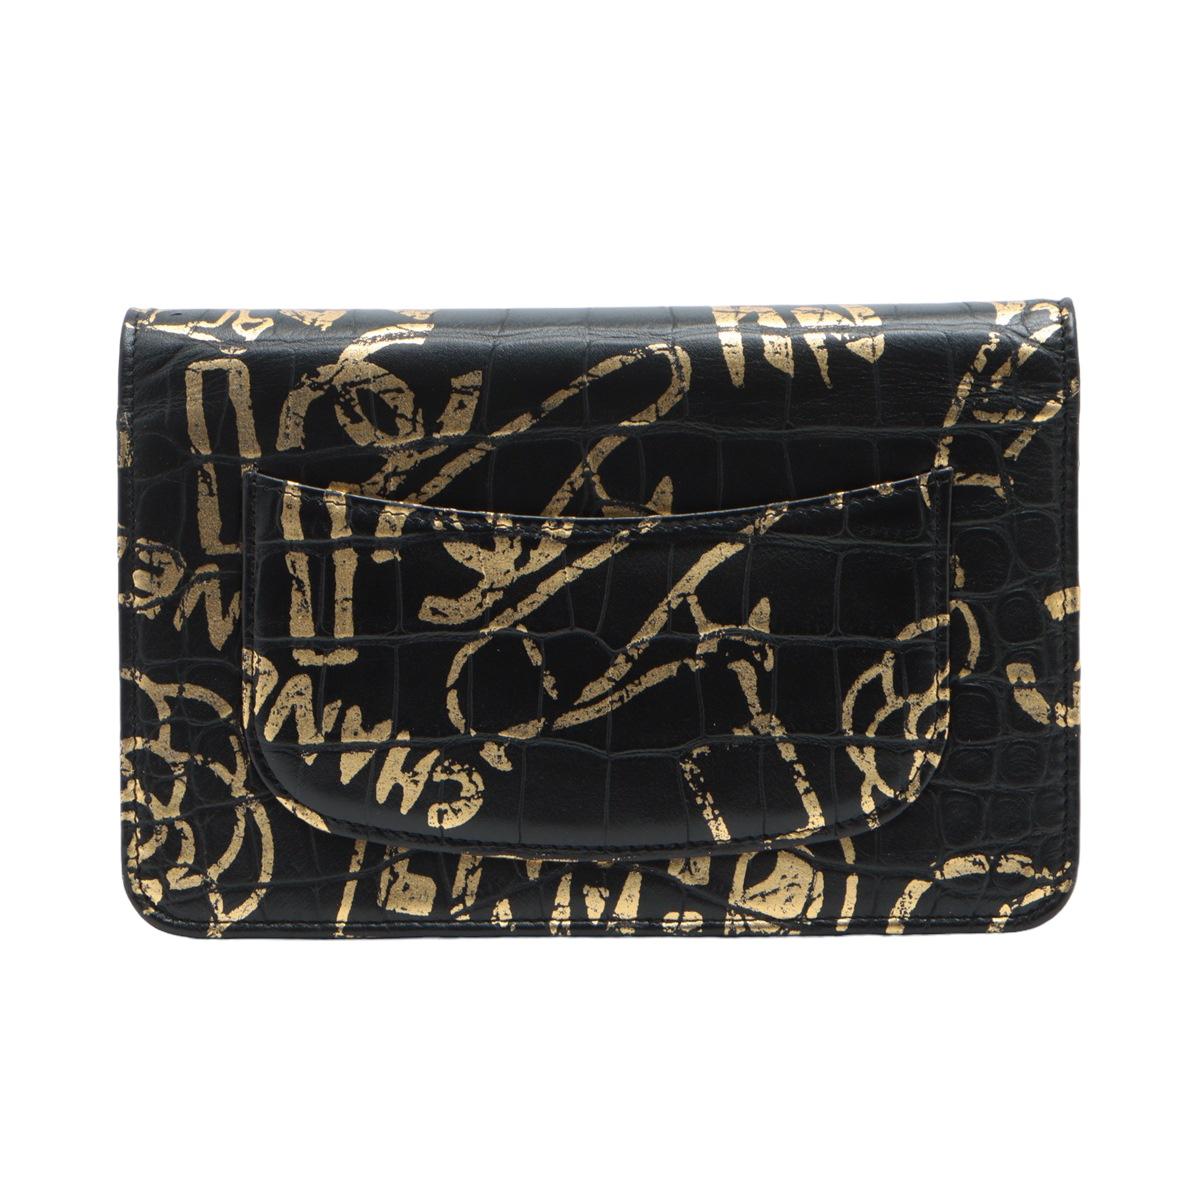 Chanel Black and Gold Graffiti Crocodile Embossed Calfskin 2.55 Reissue In Excellent Condition For Sale In DOUBLE BAY, NSW